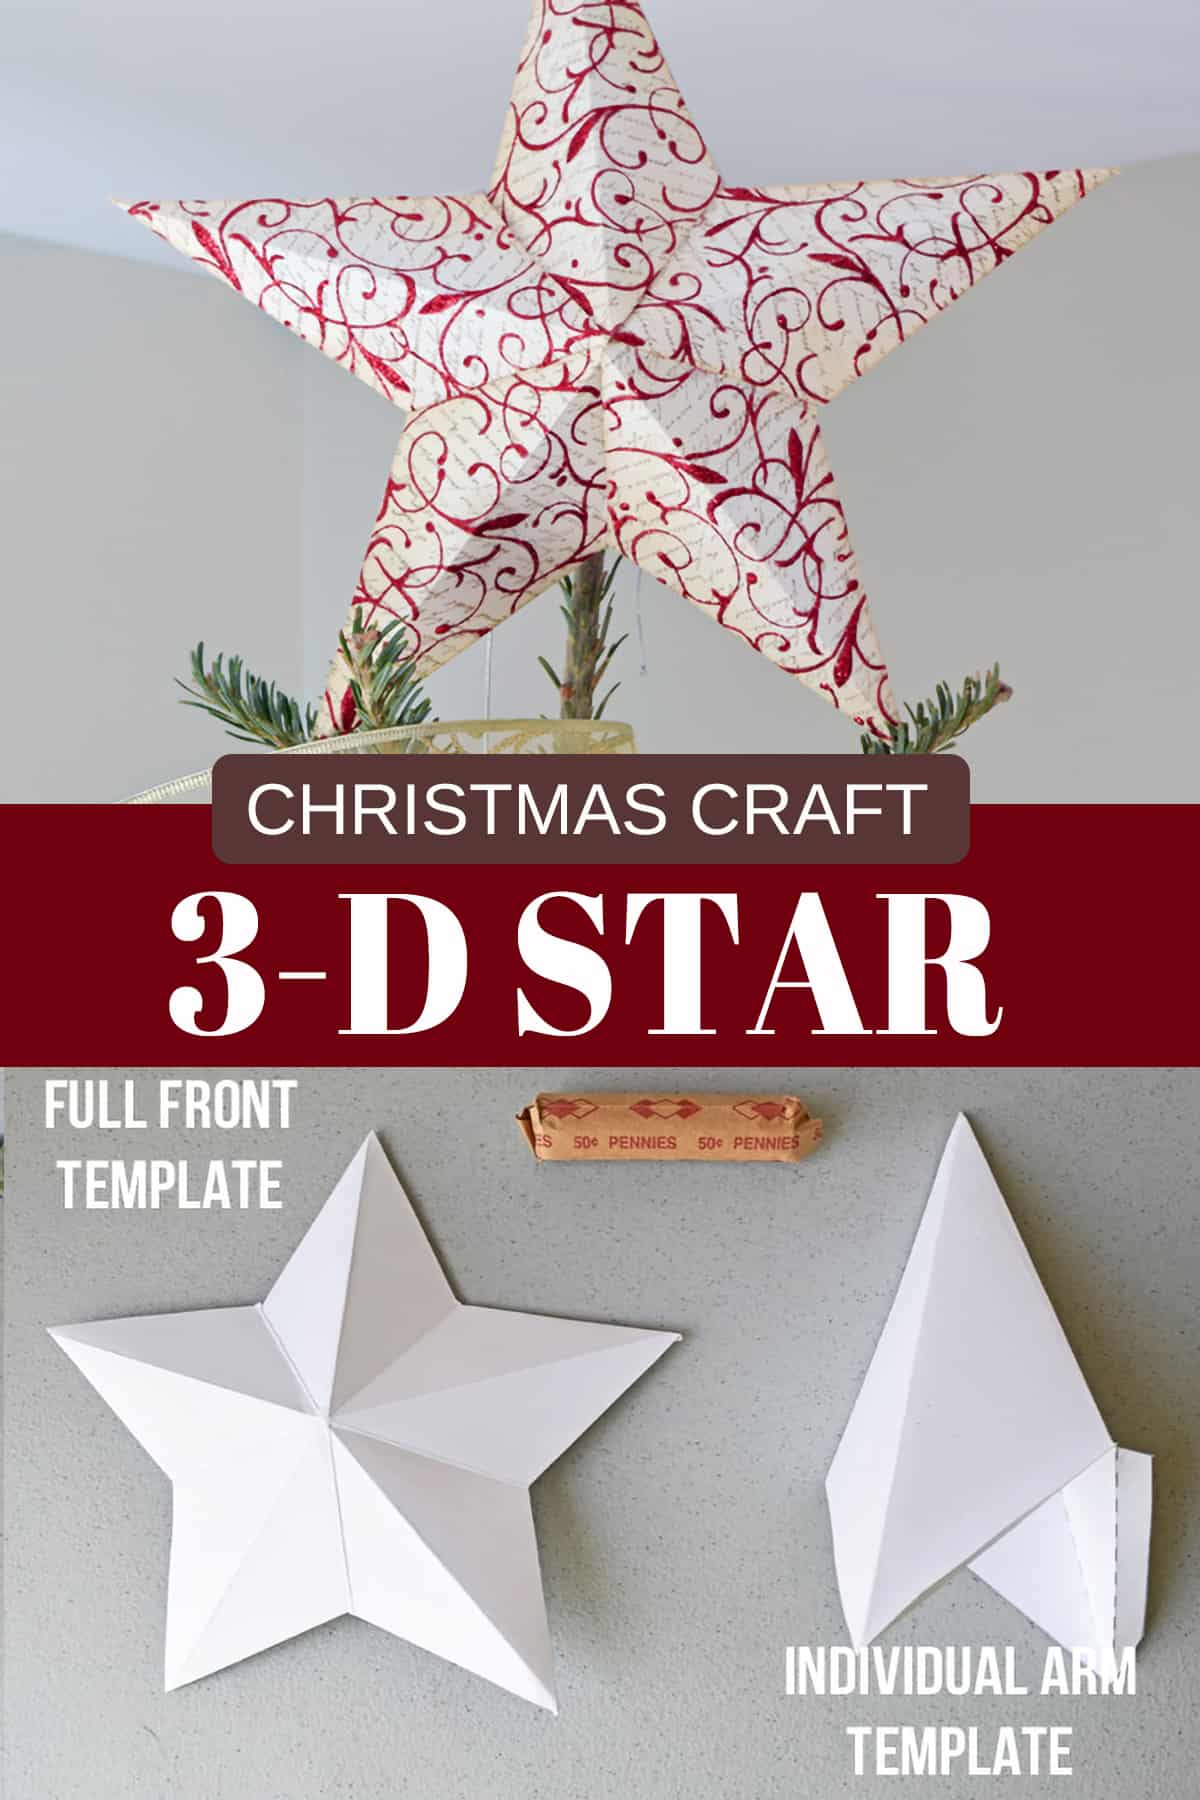 Templates showing how to make a 3D star for christmas crafts or tree topper.